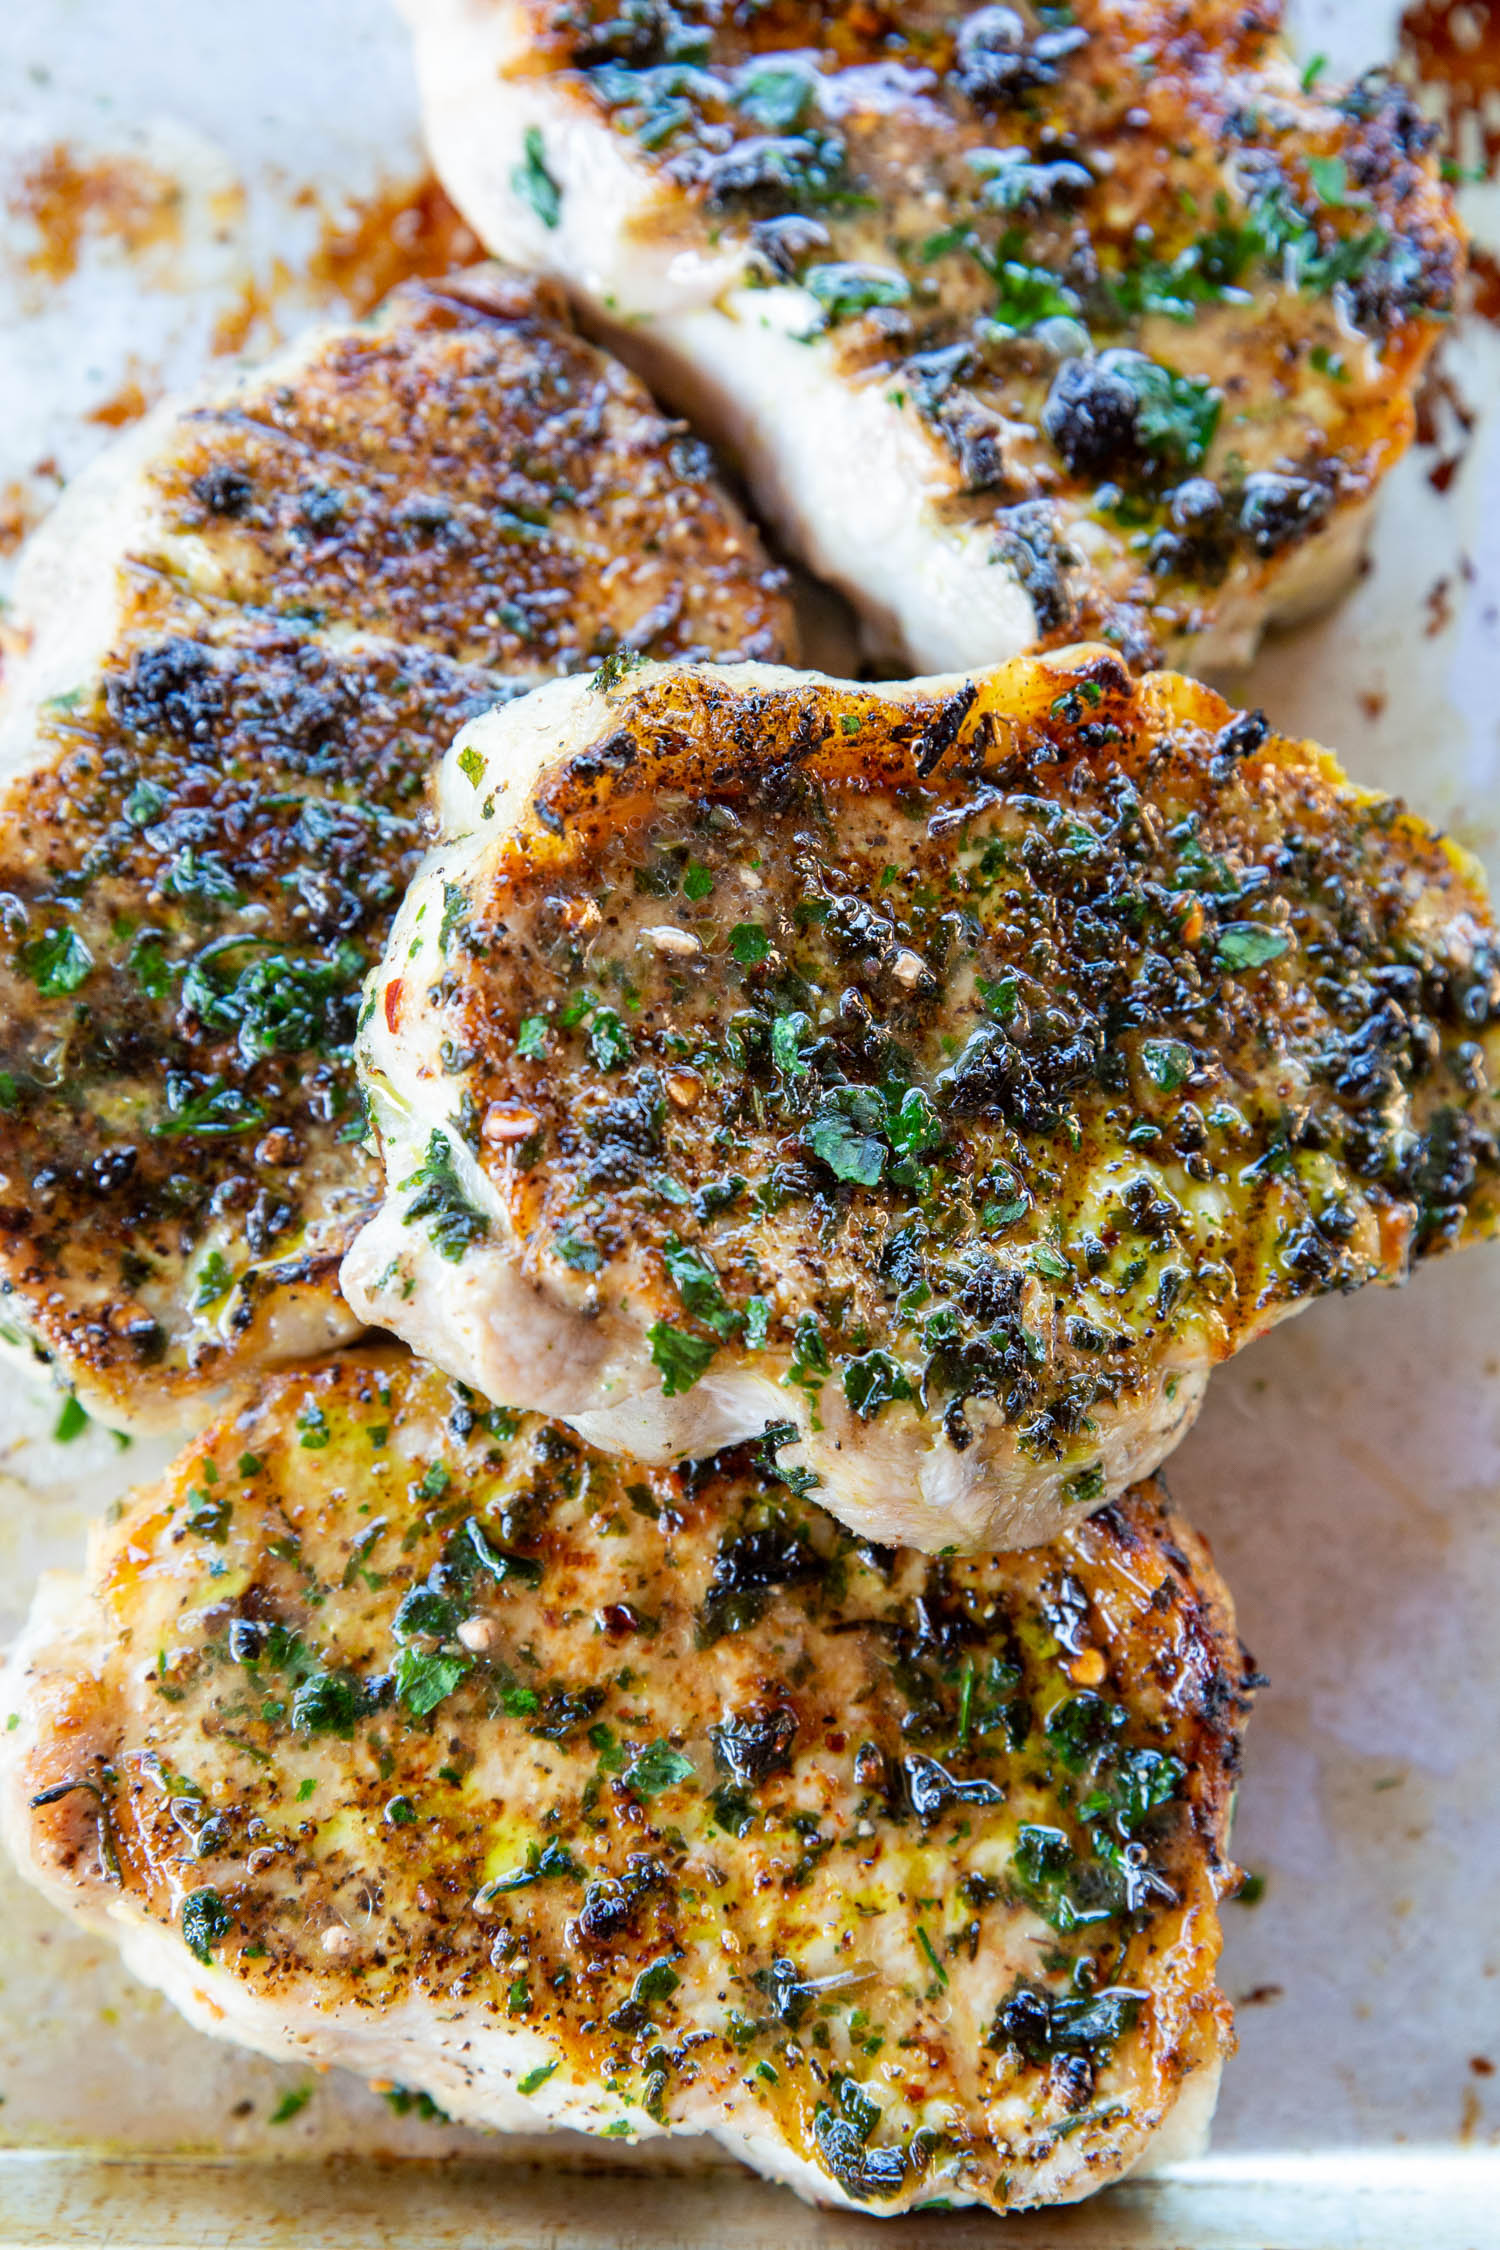 A plate of glistening grilled pork chops in herb marinade.